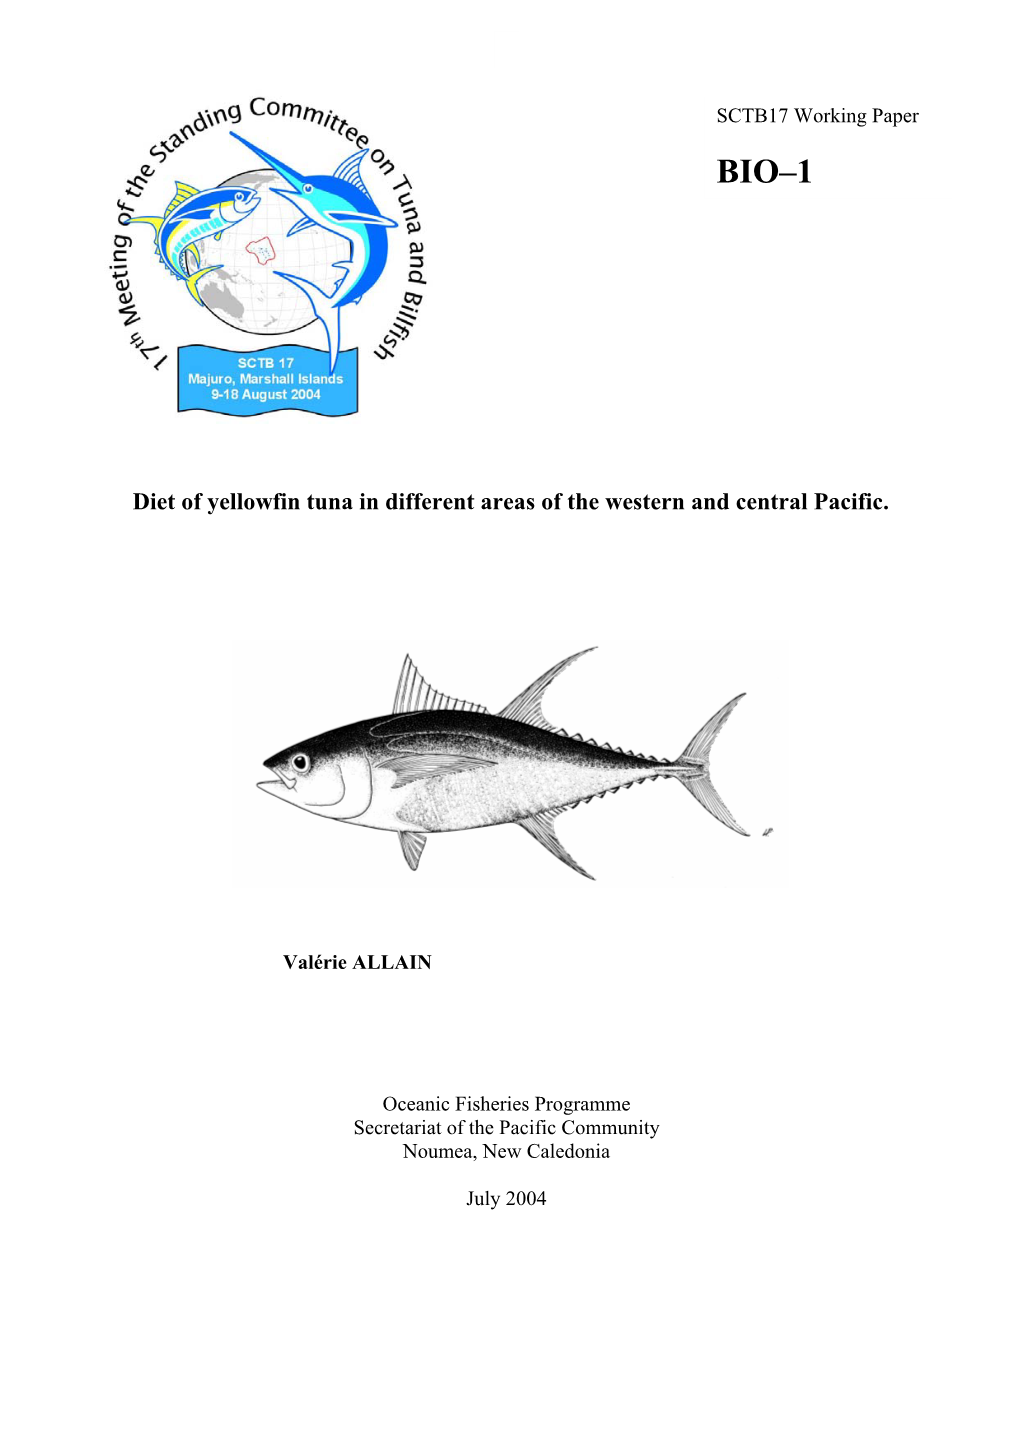 Diet of Yellowfin Tuna in Different Areas of the Western and Central Pacific